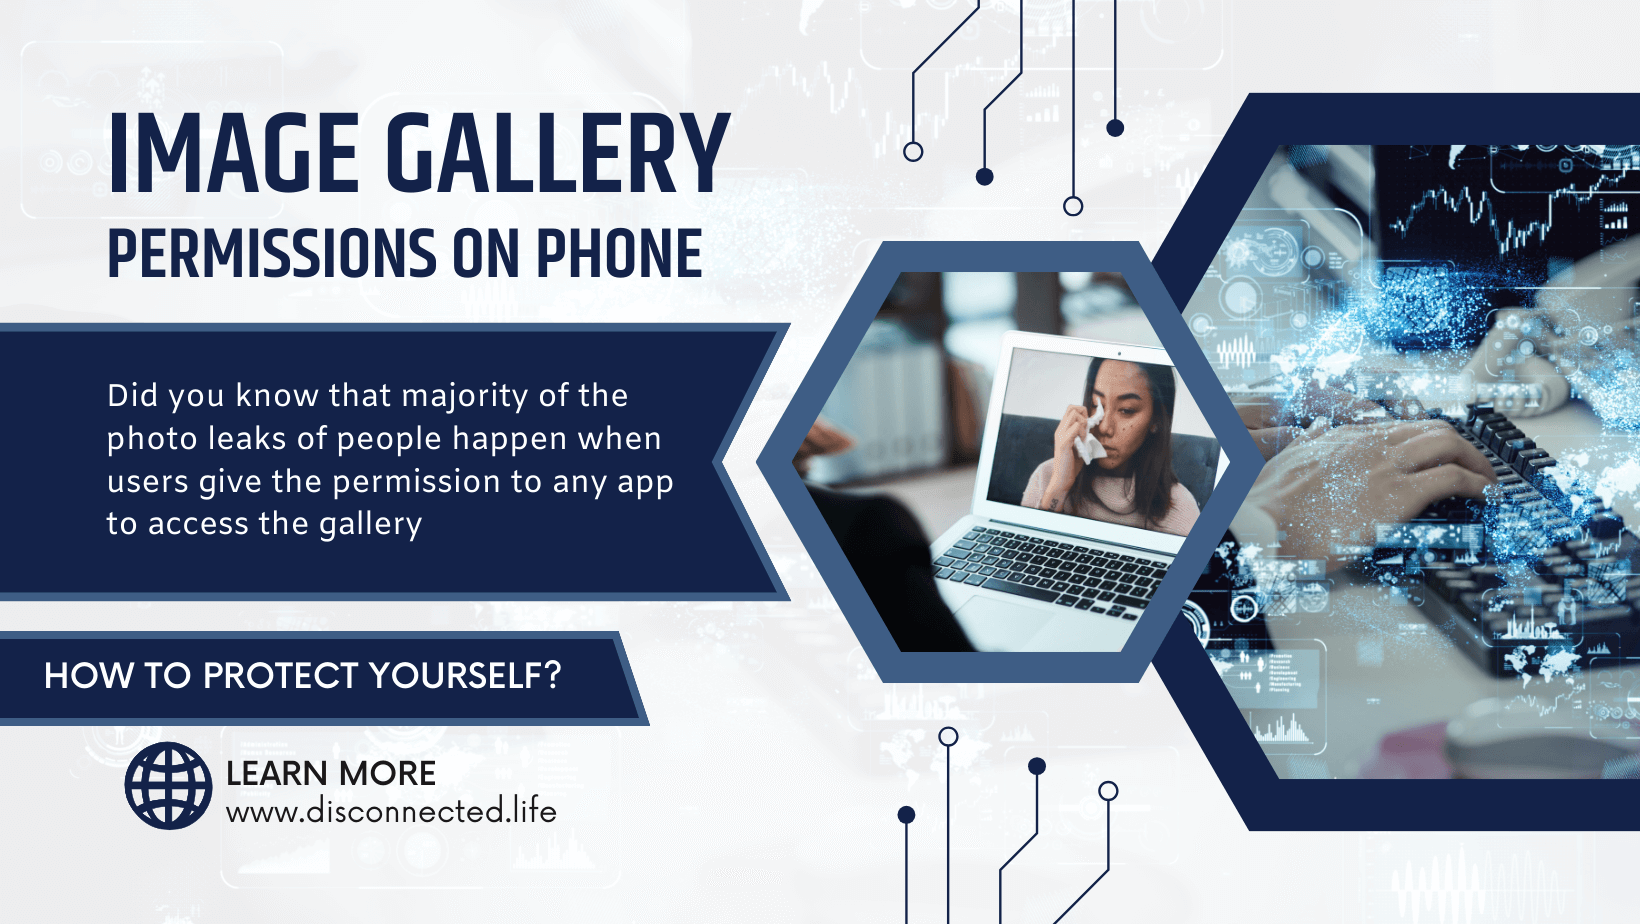 Image Gallery Permission on Phone - Disconnected Life - Safe Camera App - Encrypt Photos for Safety